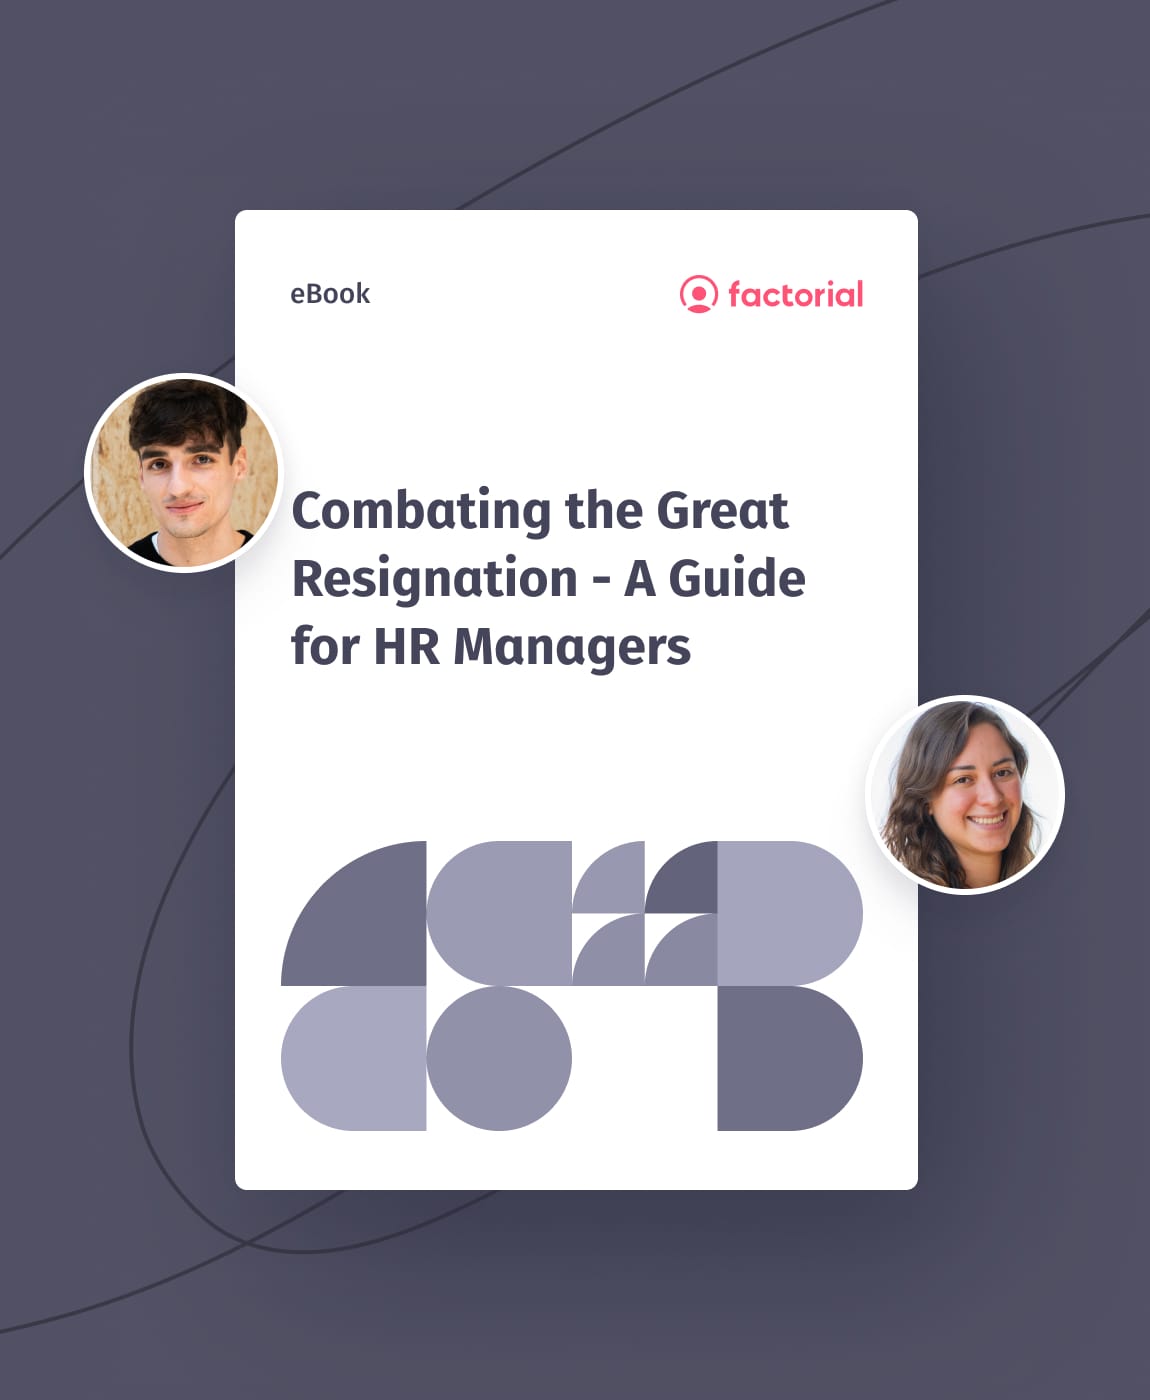 Combating the Great Resignation - A Guide for HR Managers